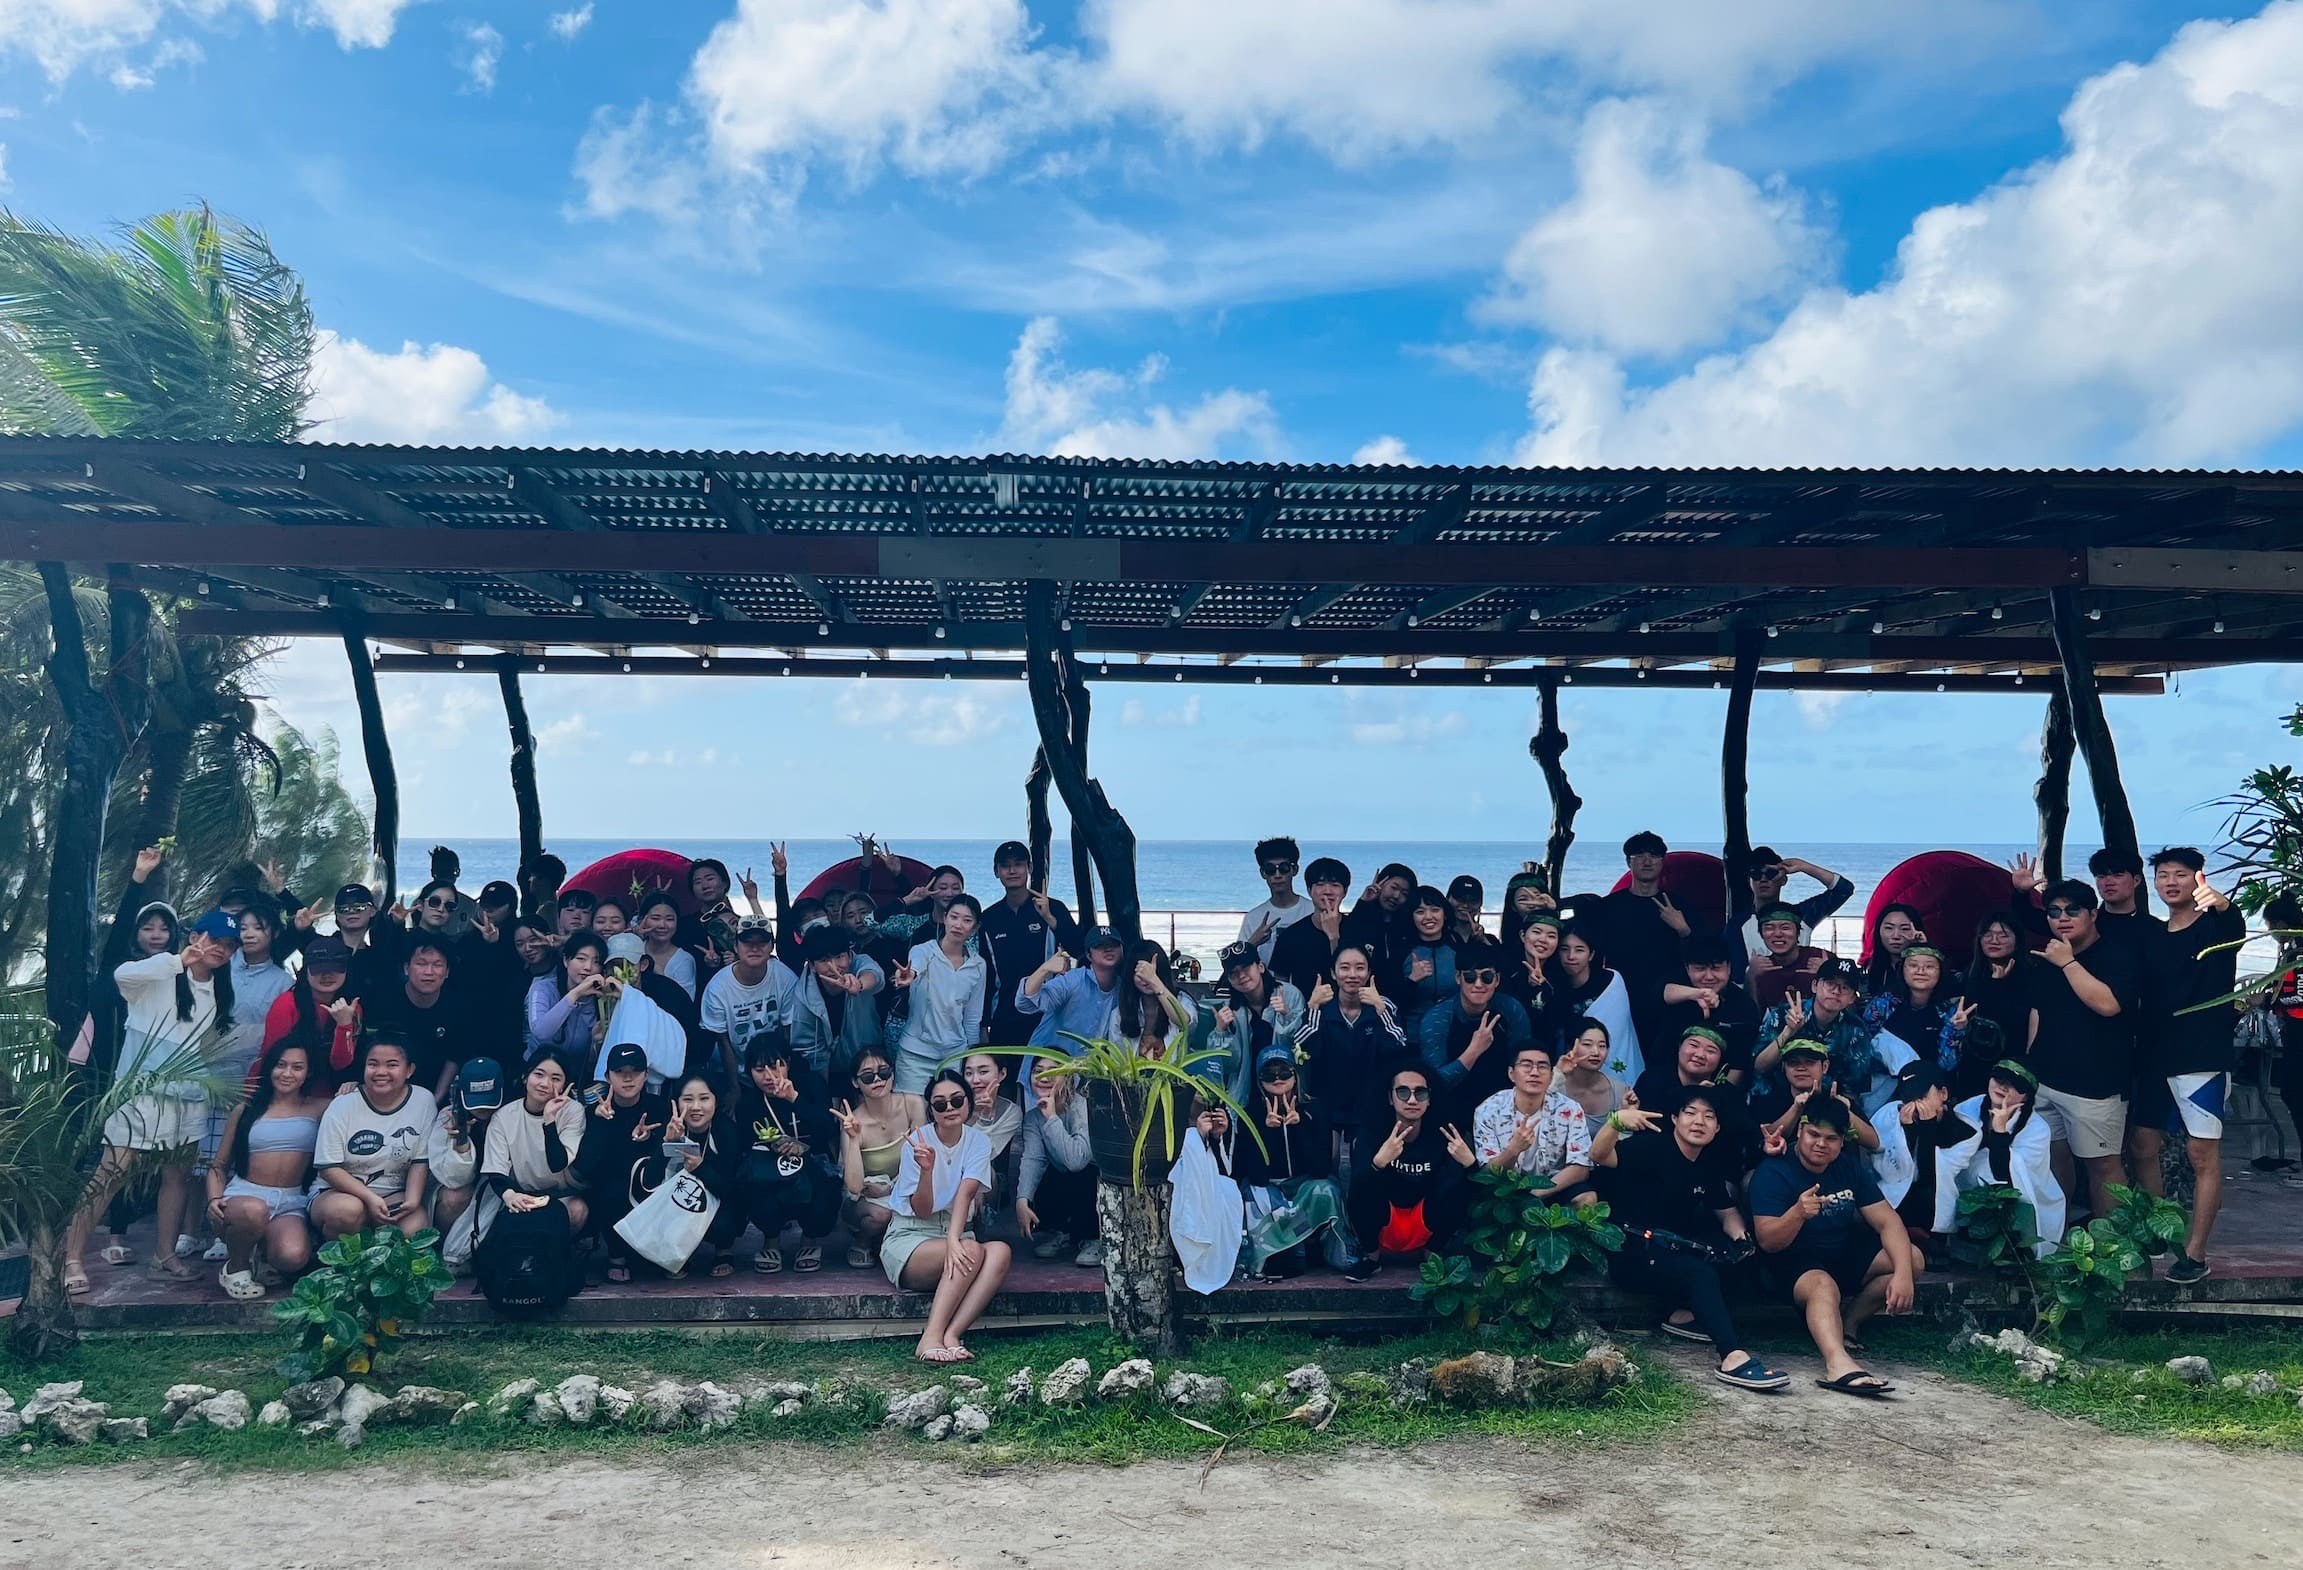 UOG English Adventure Program members at the beach taking a group photo with the international students.